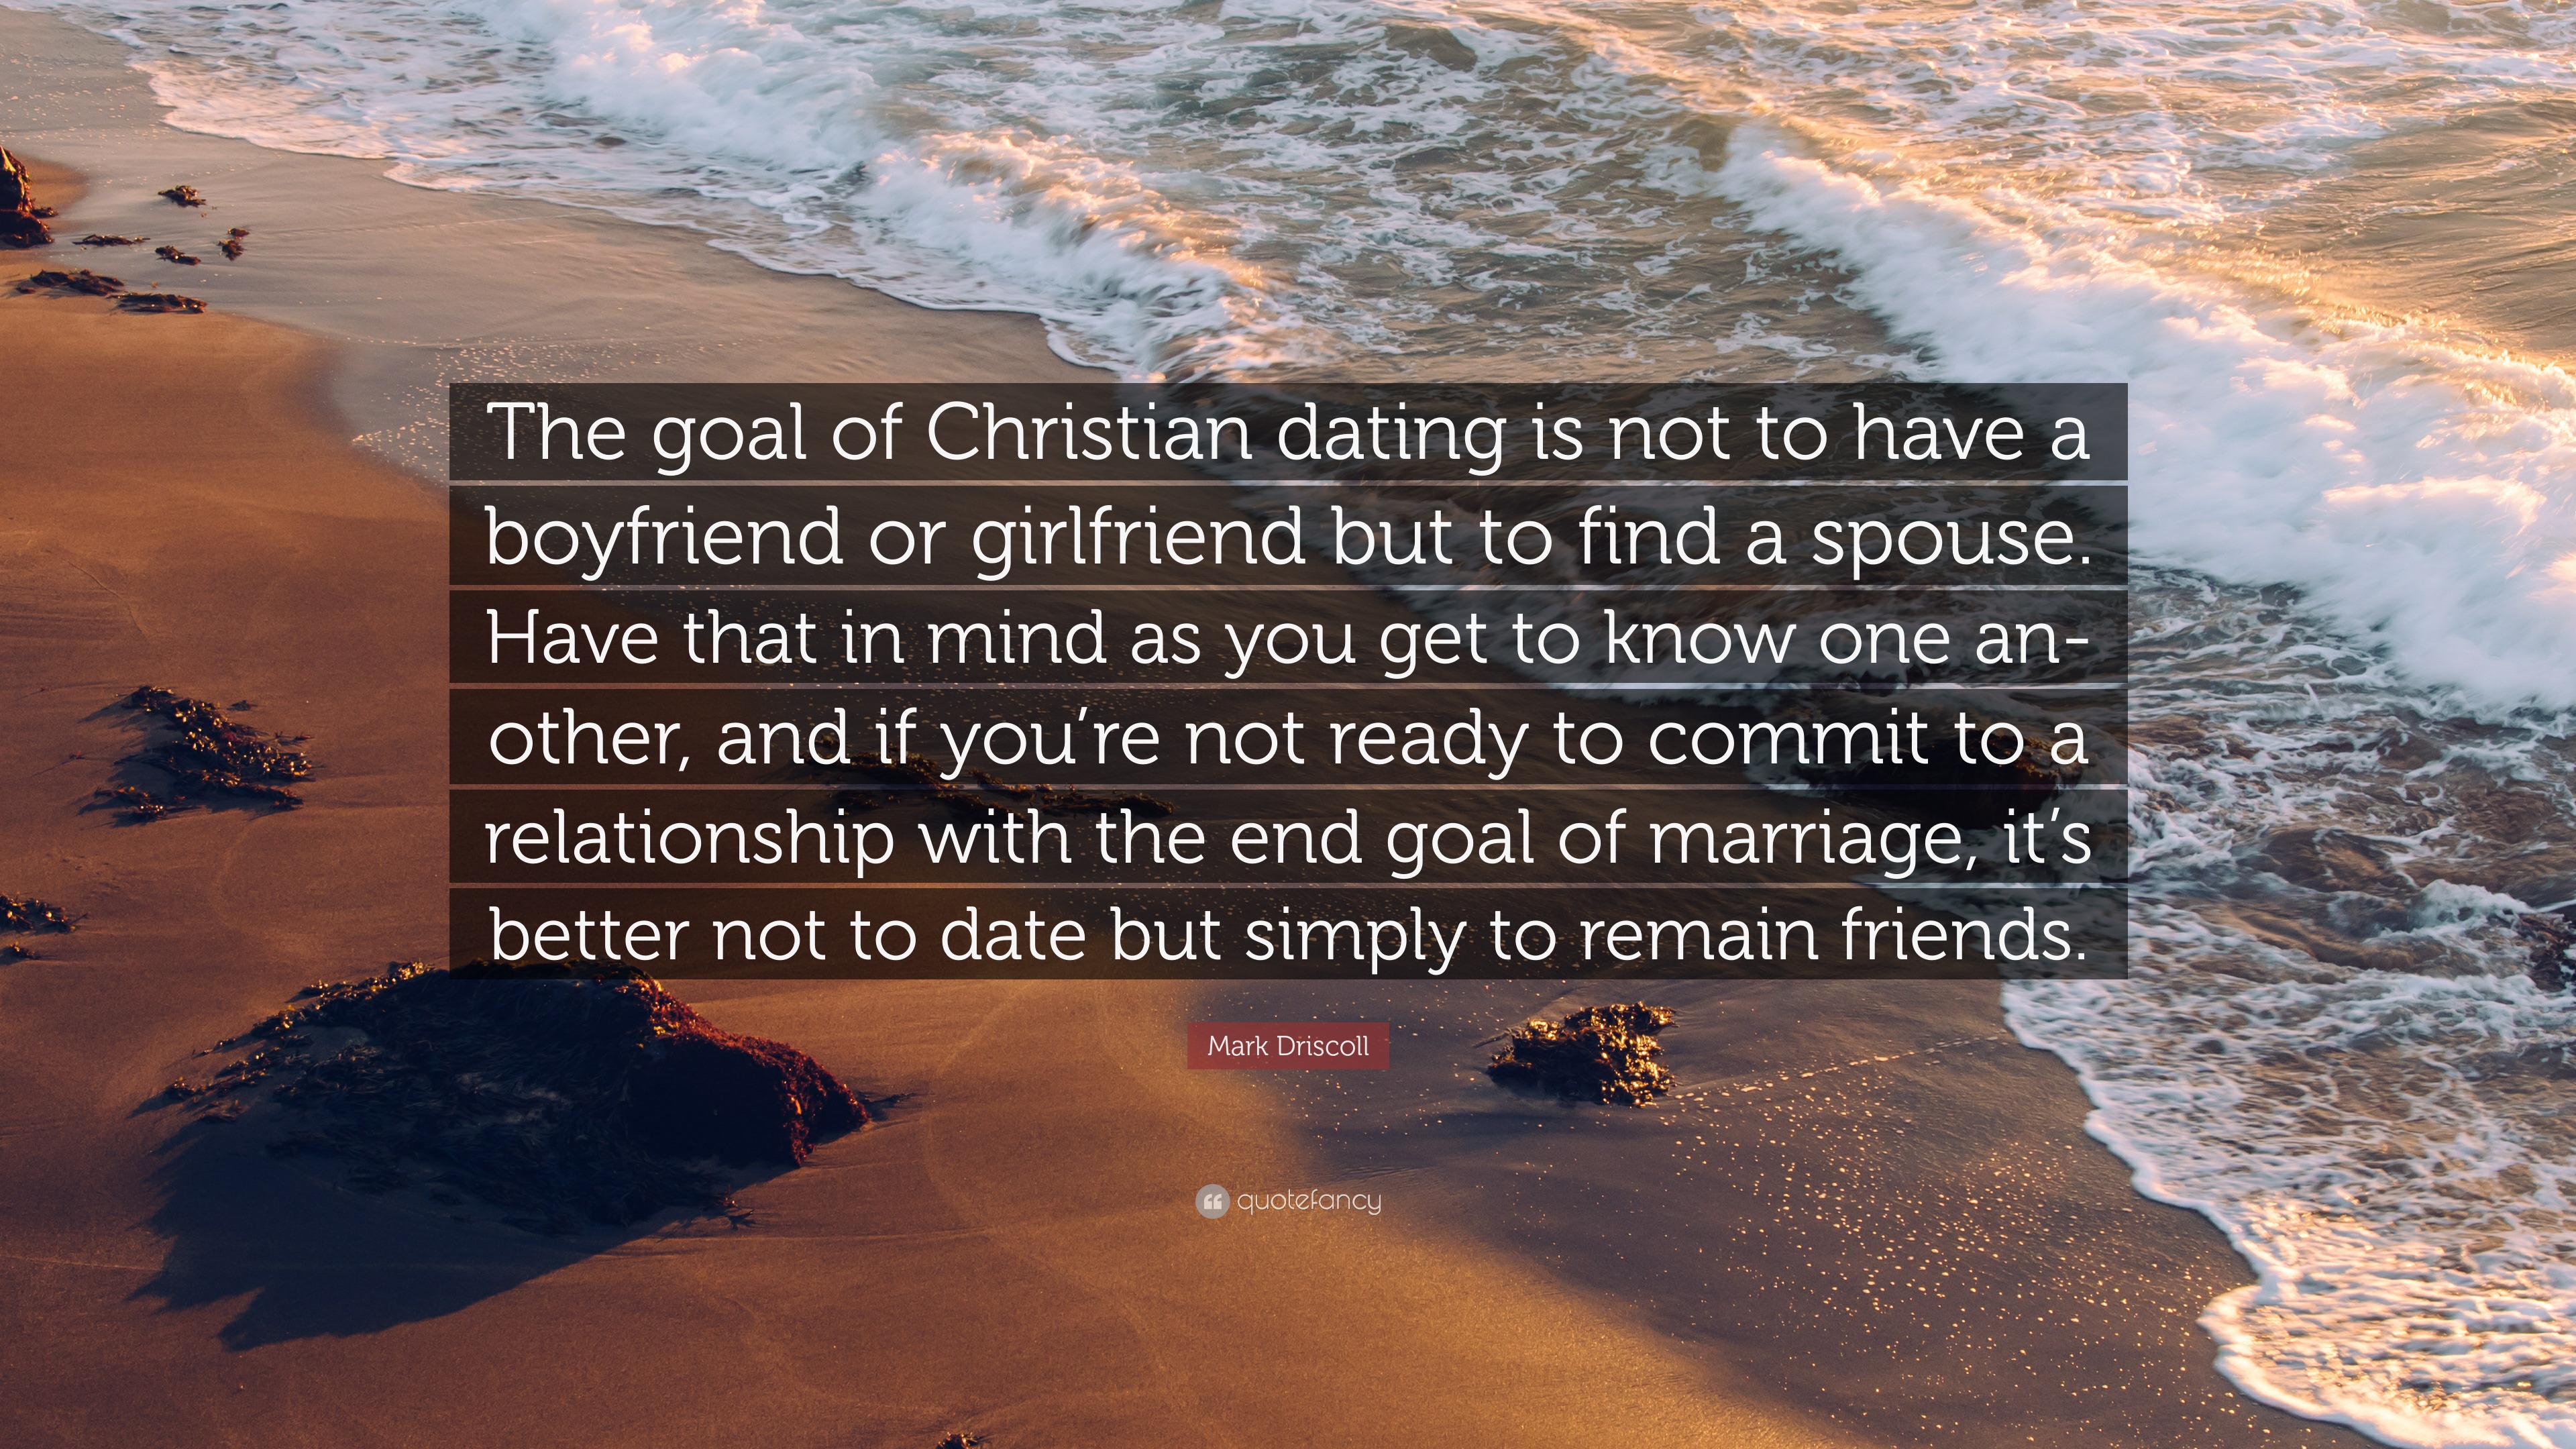 Mark driscoll dating quotes